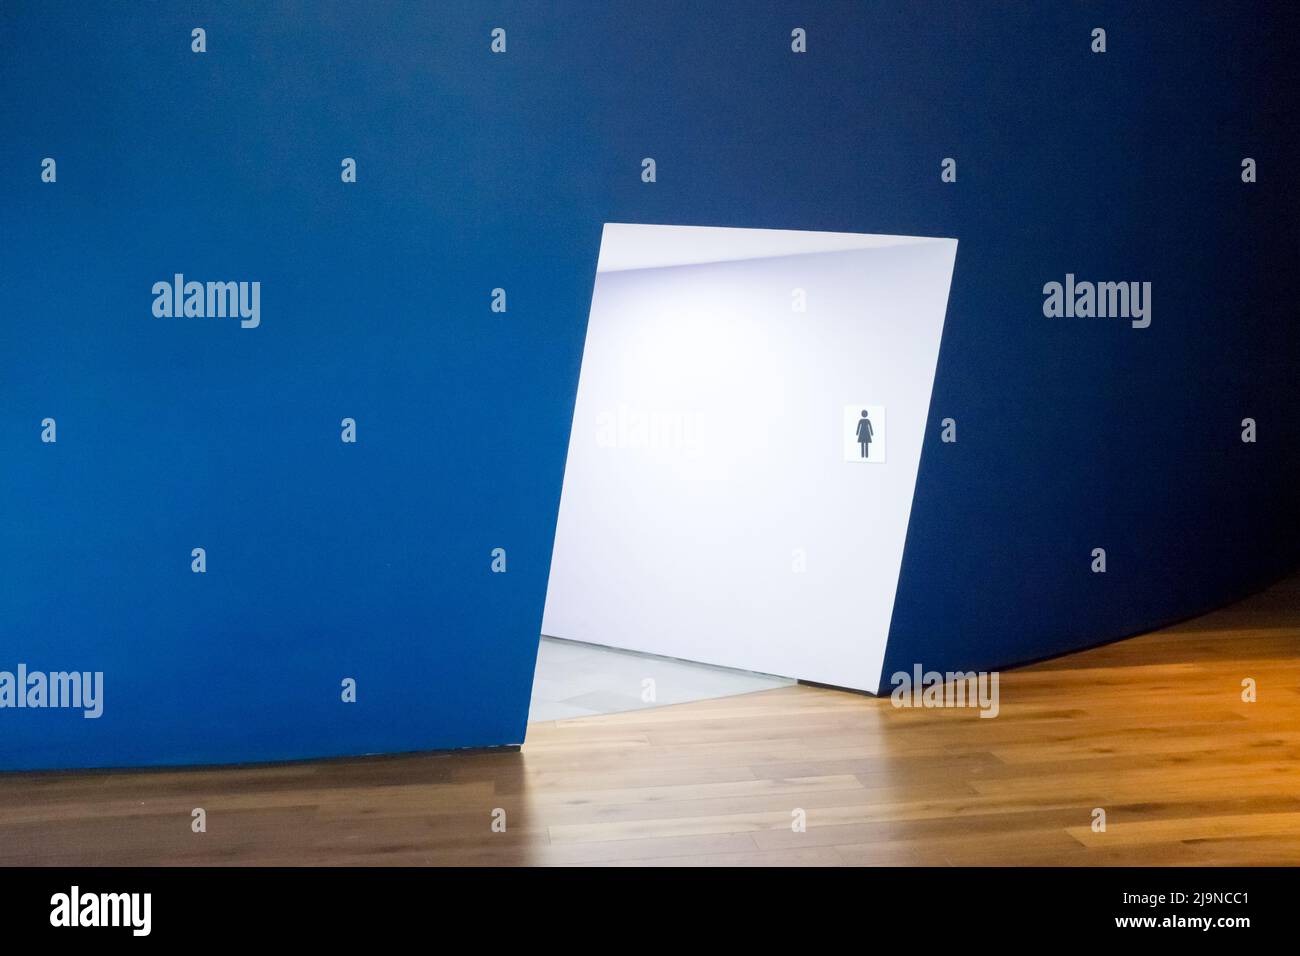 Interior architecture of a blue curved wall and illuminated slanted passageway leading to a female public toilet entrance at the Firesite Art Gallery Stock Photo